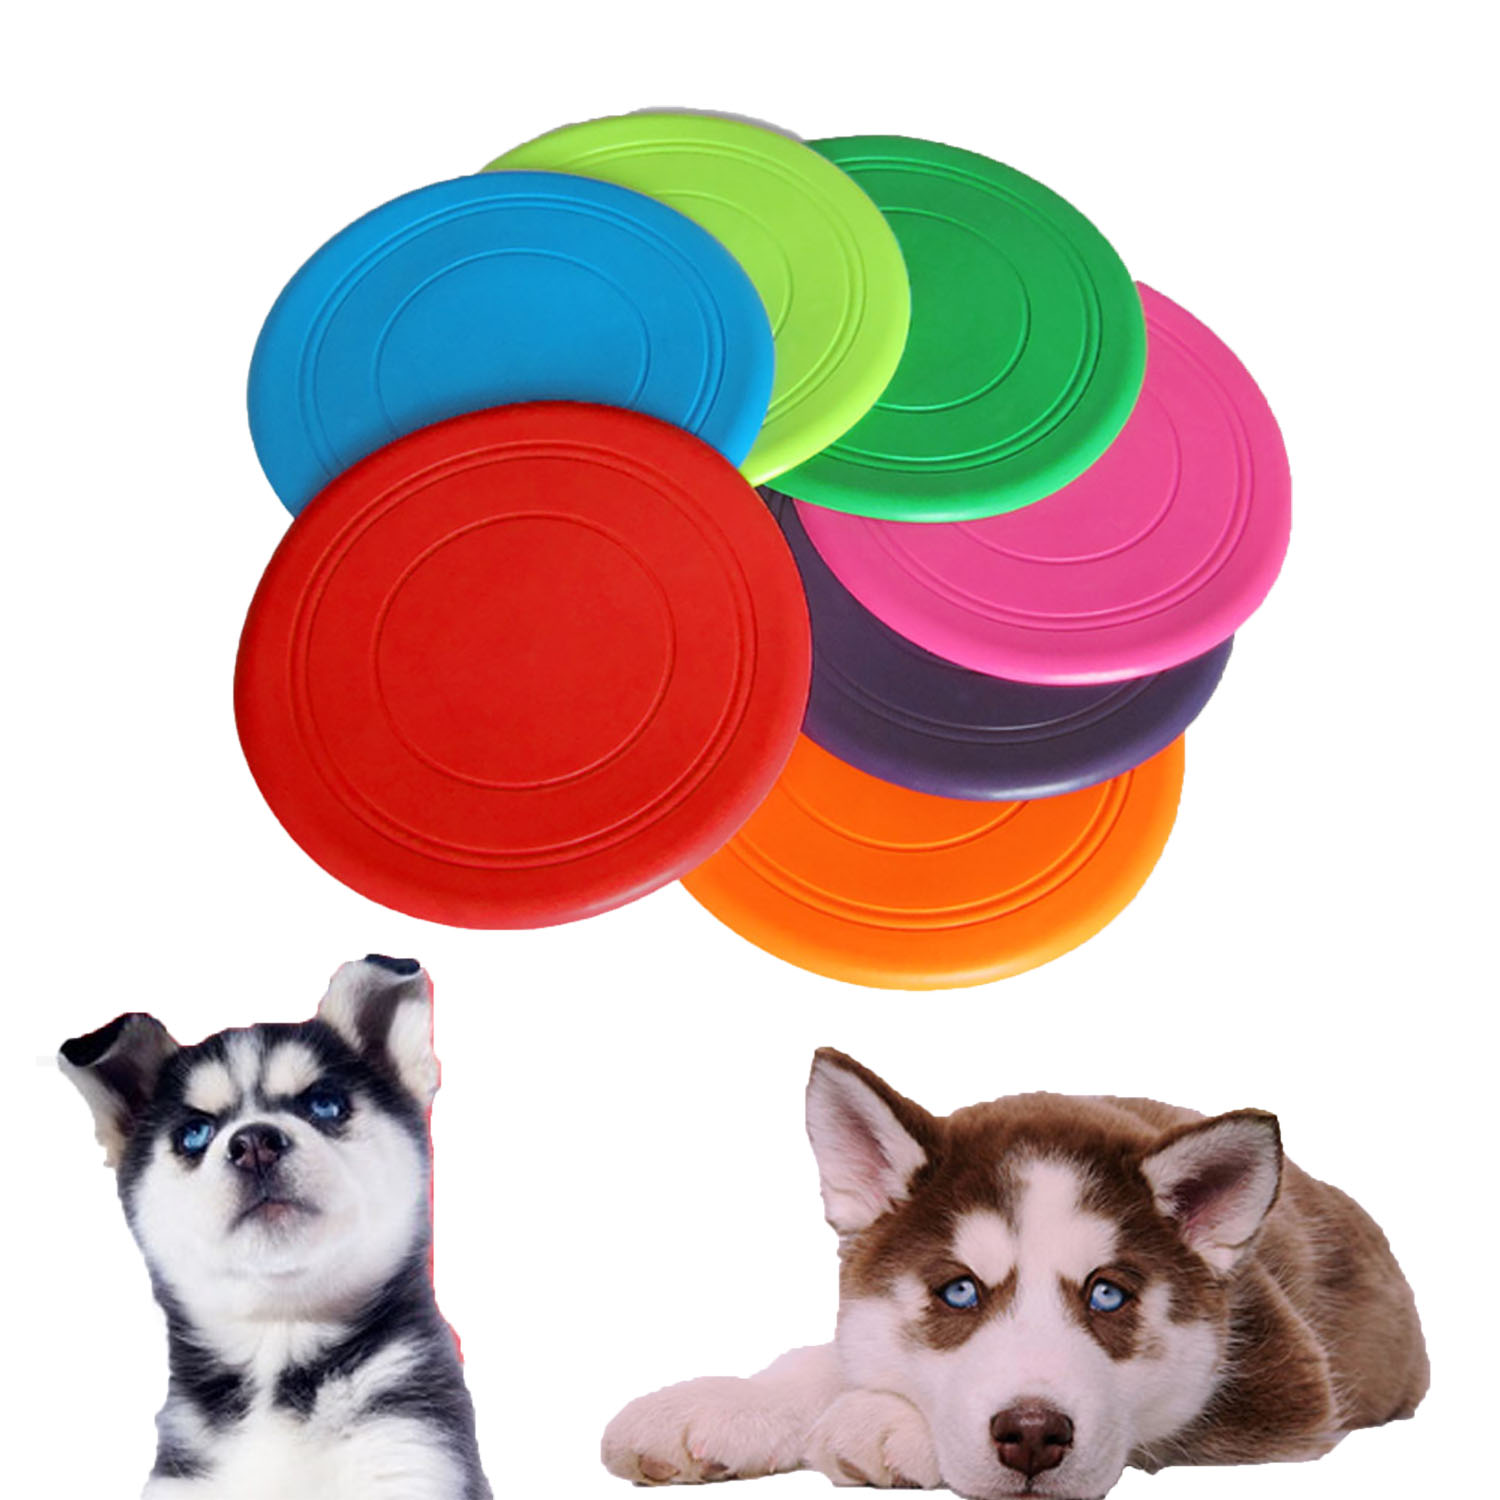 GL-AKL0007 Silicone Pet Flying Disc